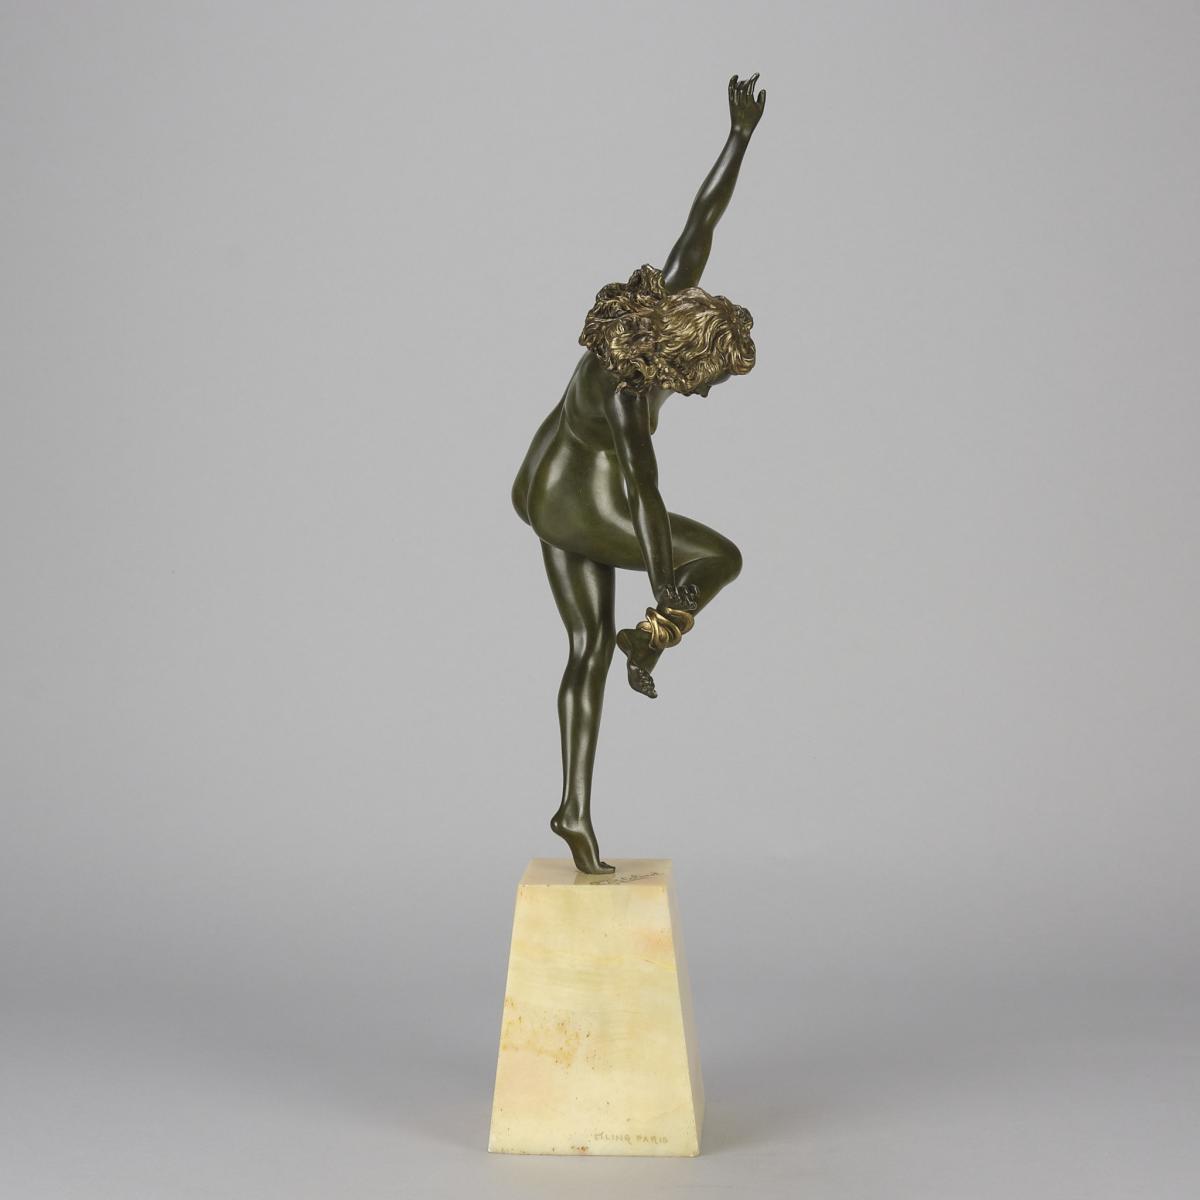 Early 20th Century French Bronze "Danseuse au Serpent" by Claire Colinet